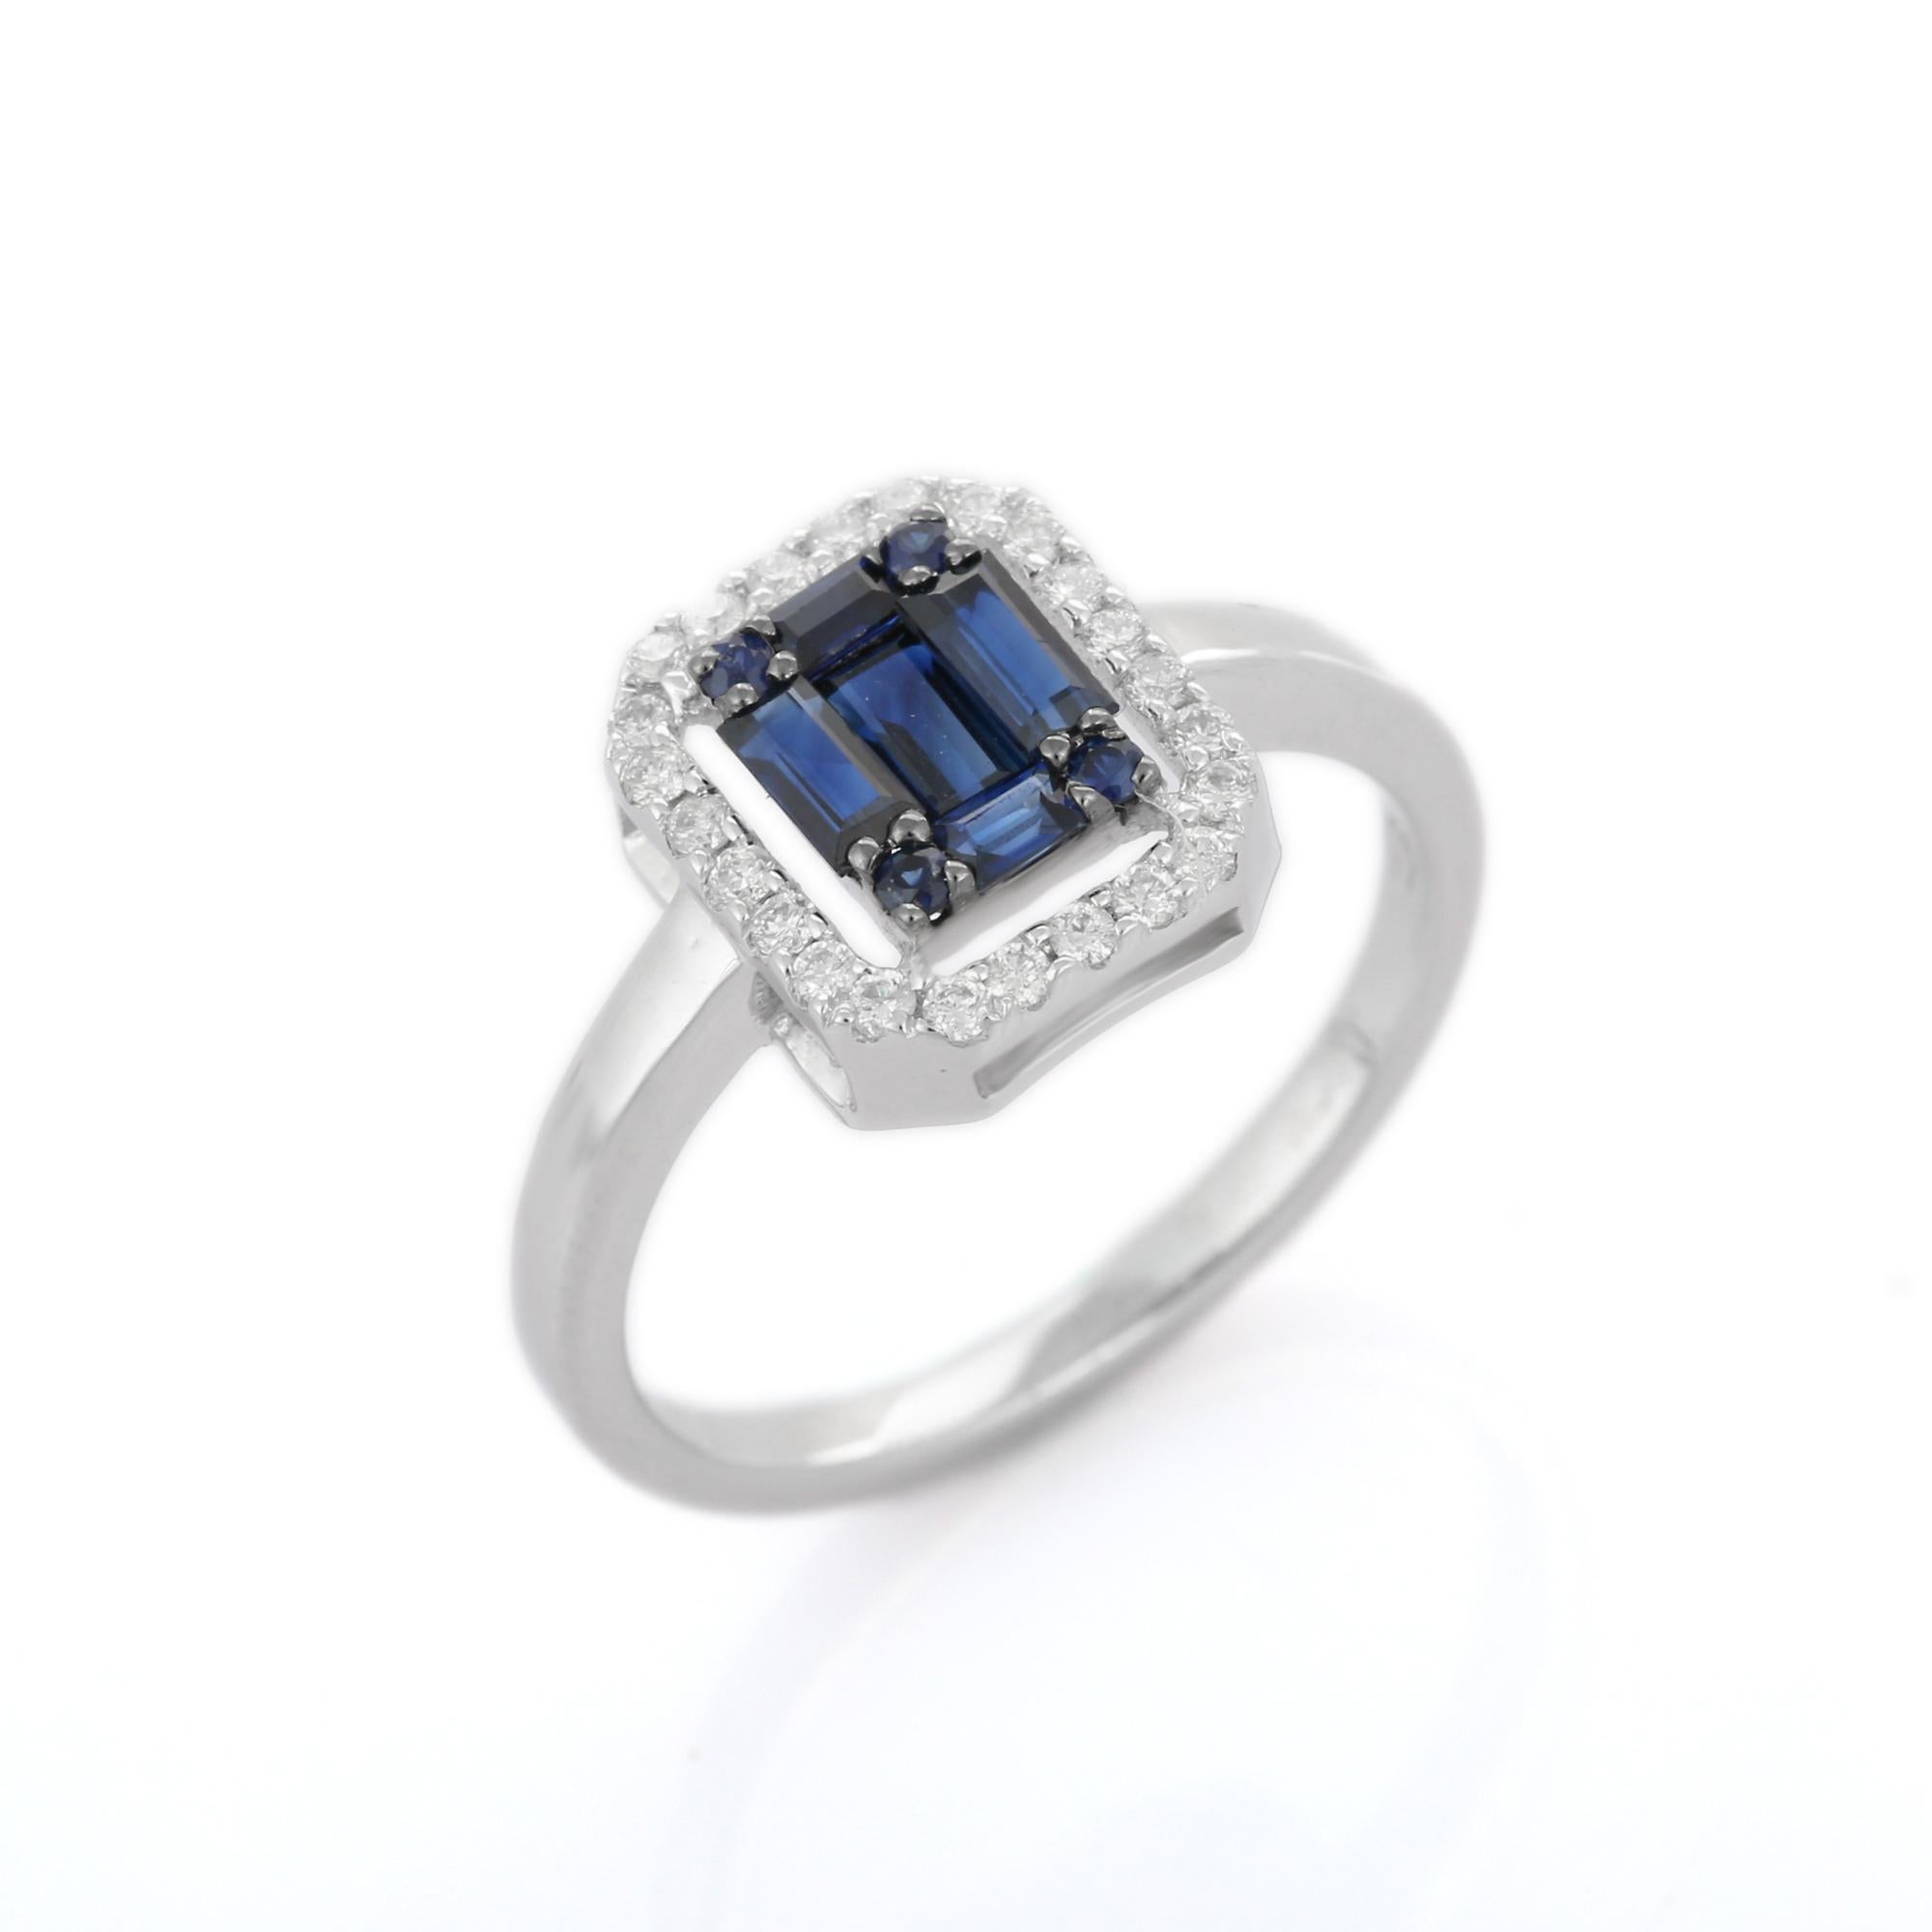 For Sale:  Exquisite Halo Diamond and Sapphire Cluster Ring Studded in 18K White Gold 5